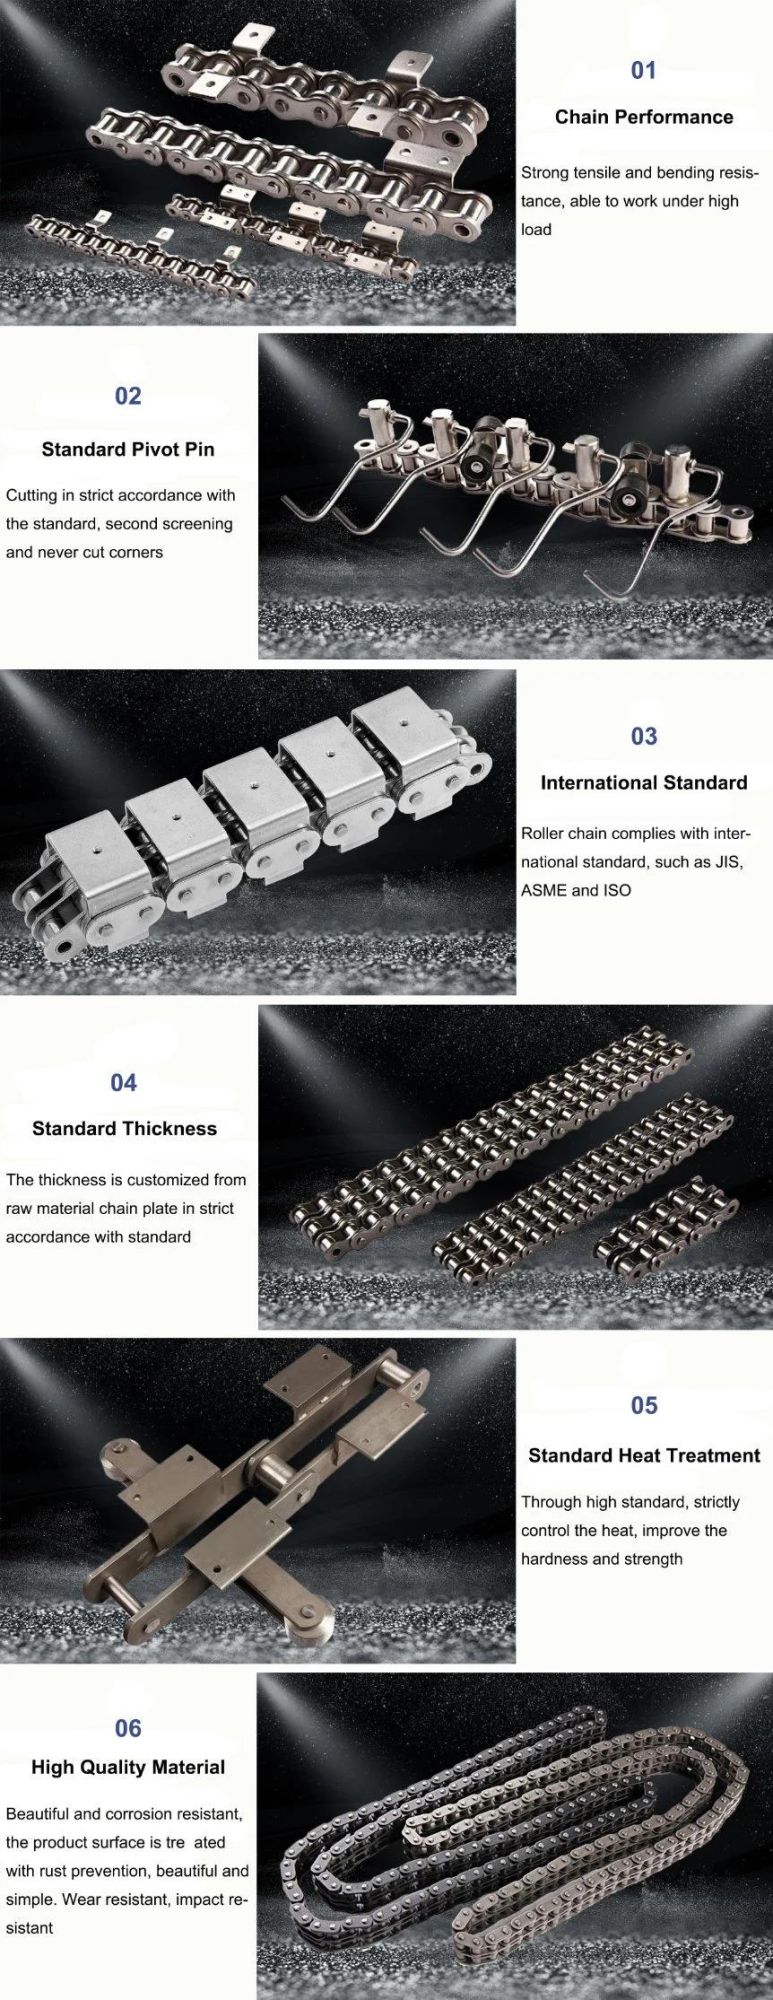 Professional Chains Manufacturer Stainless Steel Welded Flat Top Transmission Conveyor Roller Chain